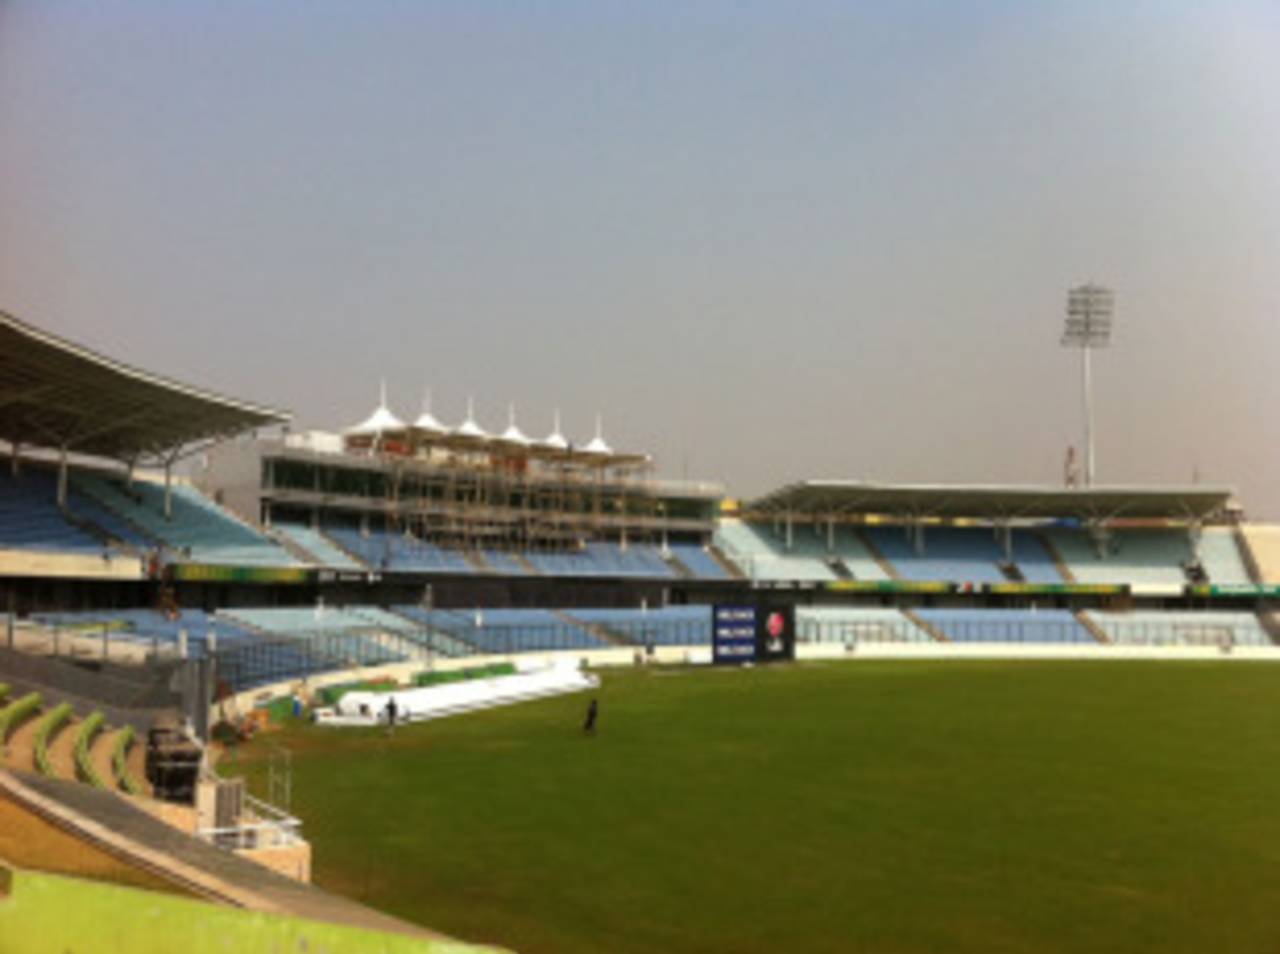 The Shere Bangla Stadium was half empty even though people were queued up outside trying to get in&nbsp;&nbsp;&bull;&nbsp;&nbsp;ESPNcricinfo Ltd